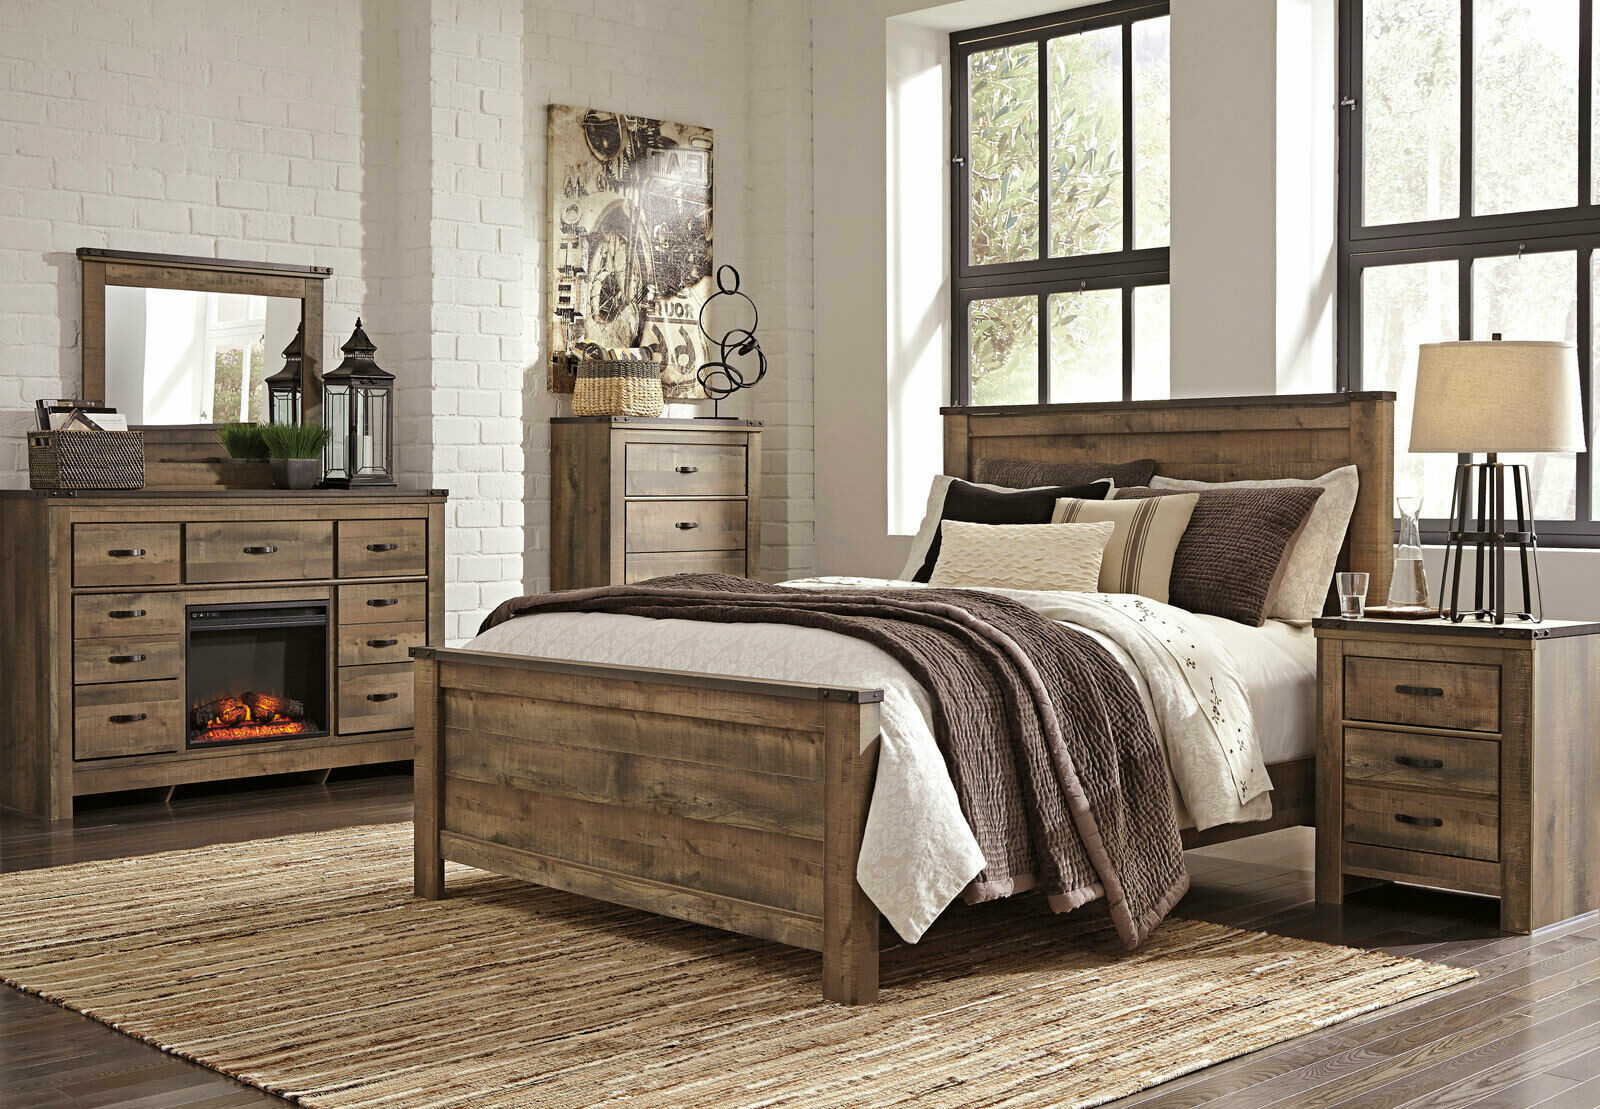 Rustic King Size Bedroom Sets New Modern Rustic Brown W Fireplace Bedroom Furniture 5pcs Of Rustic King Size Bedroom Sets 